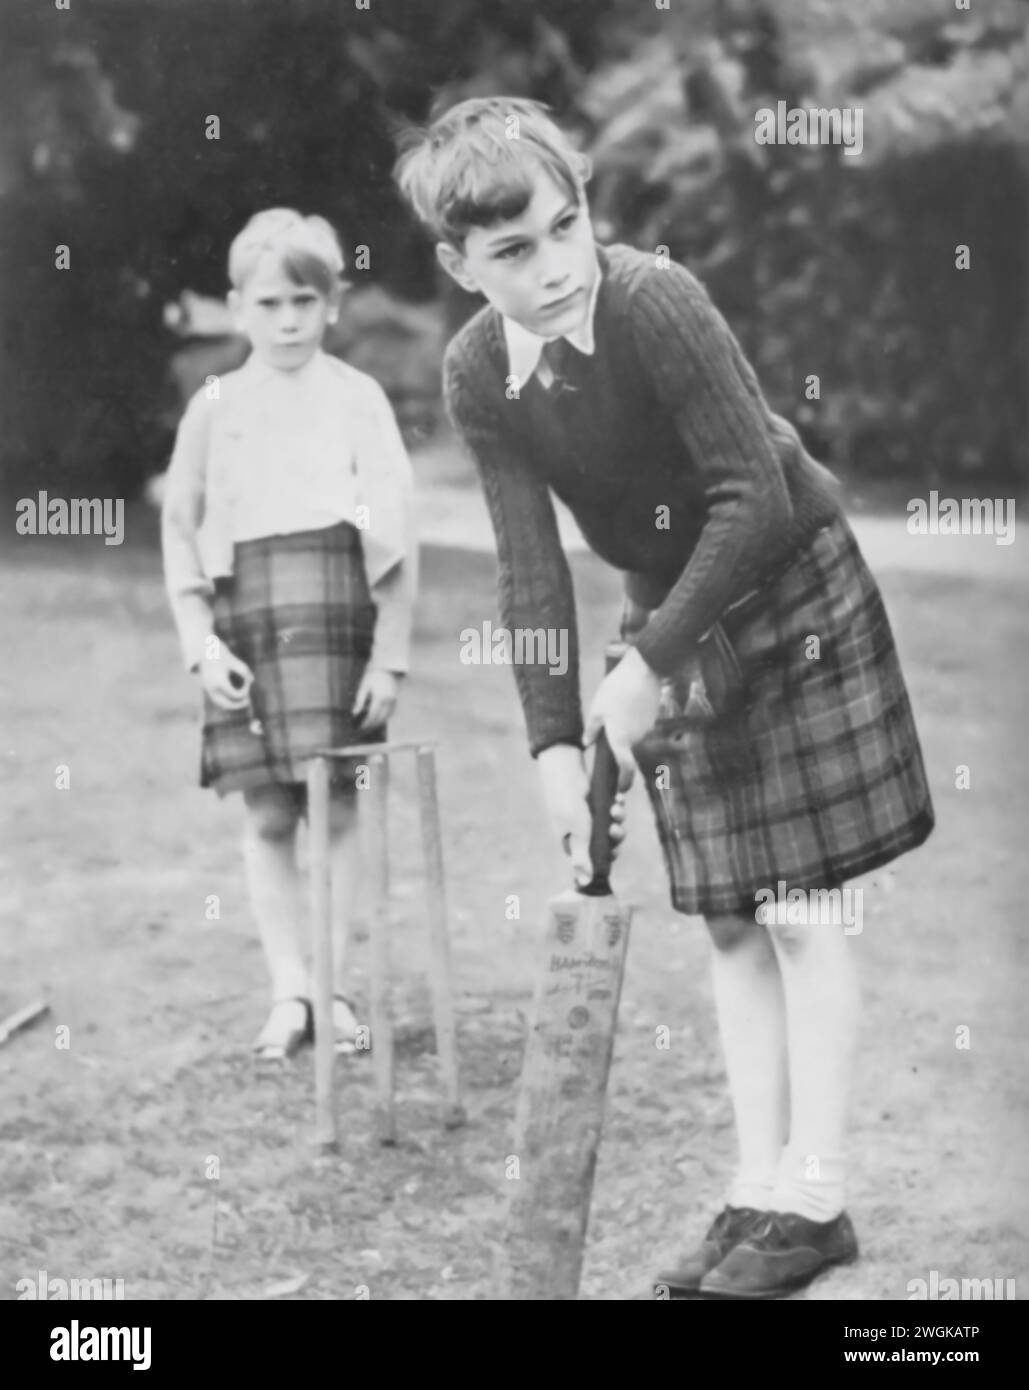 A photograph of Prince William and Prince Richard of Gloucester playing cricket in Inverness in 1950. The young princes, sons of Prince Henry, Duke of Gloucester, and Princess Alice, Duchess of Gloucester, are captured enjoying a quintessentially British pastime. Stock Photo